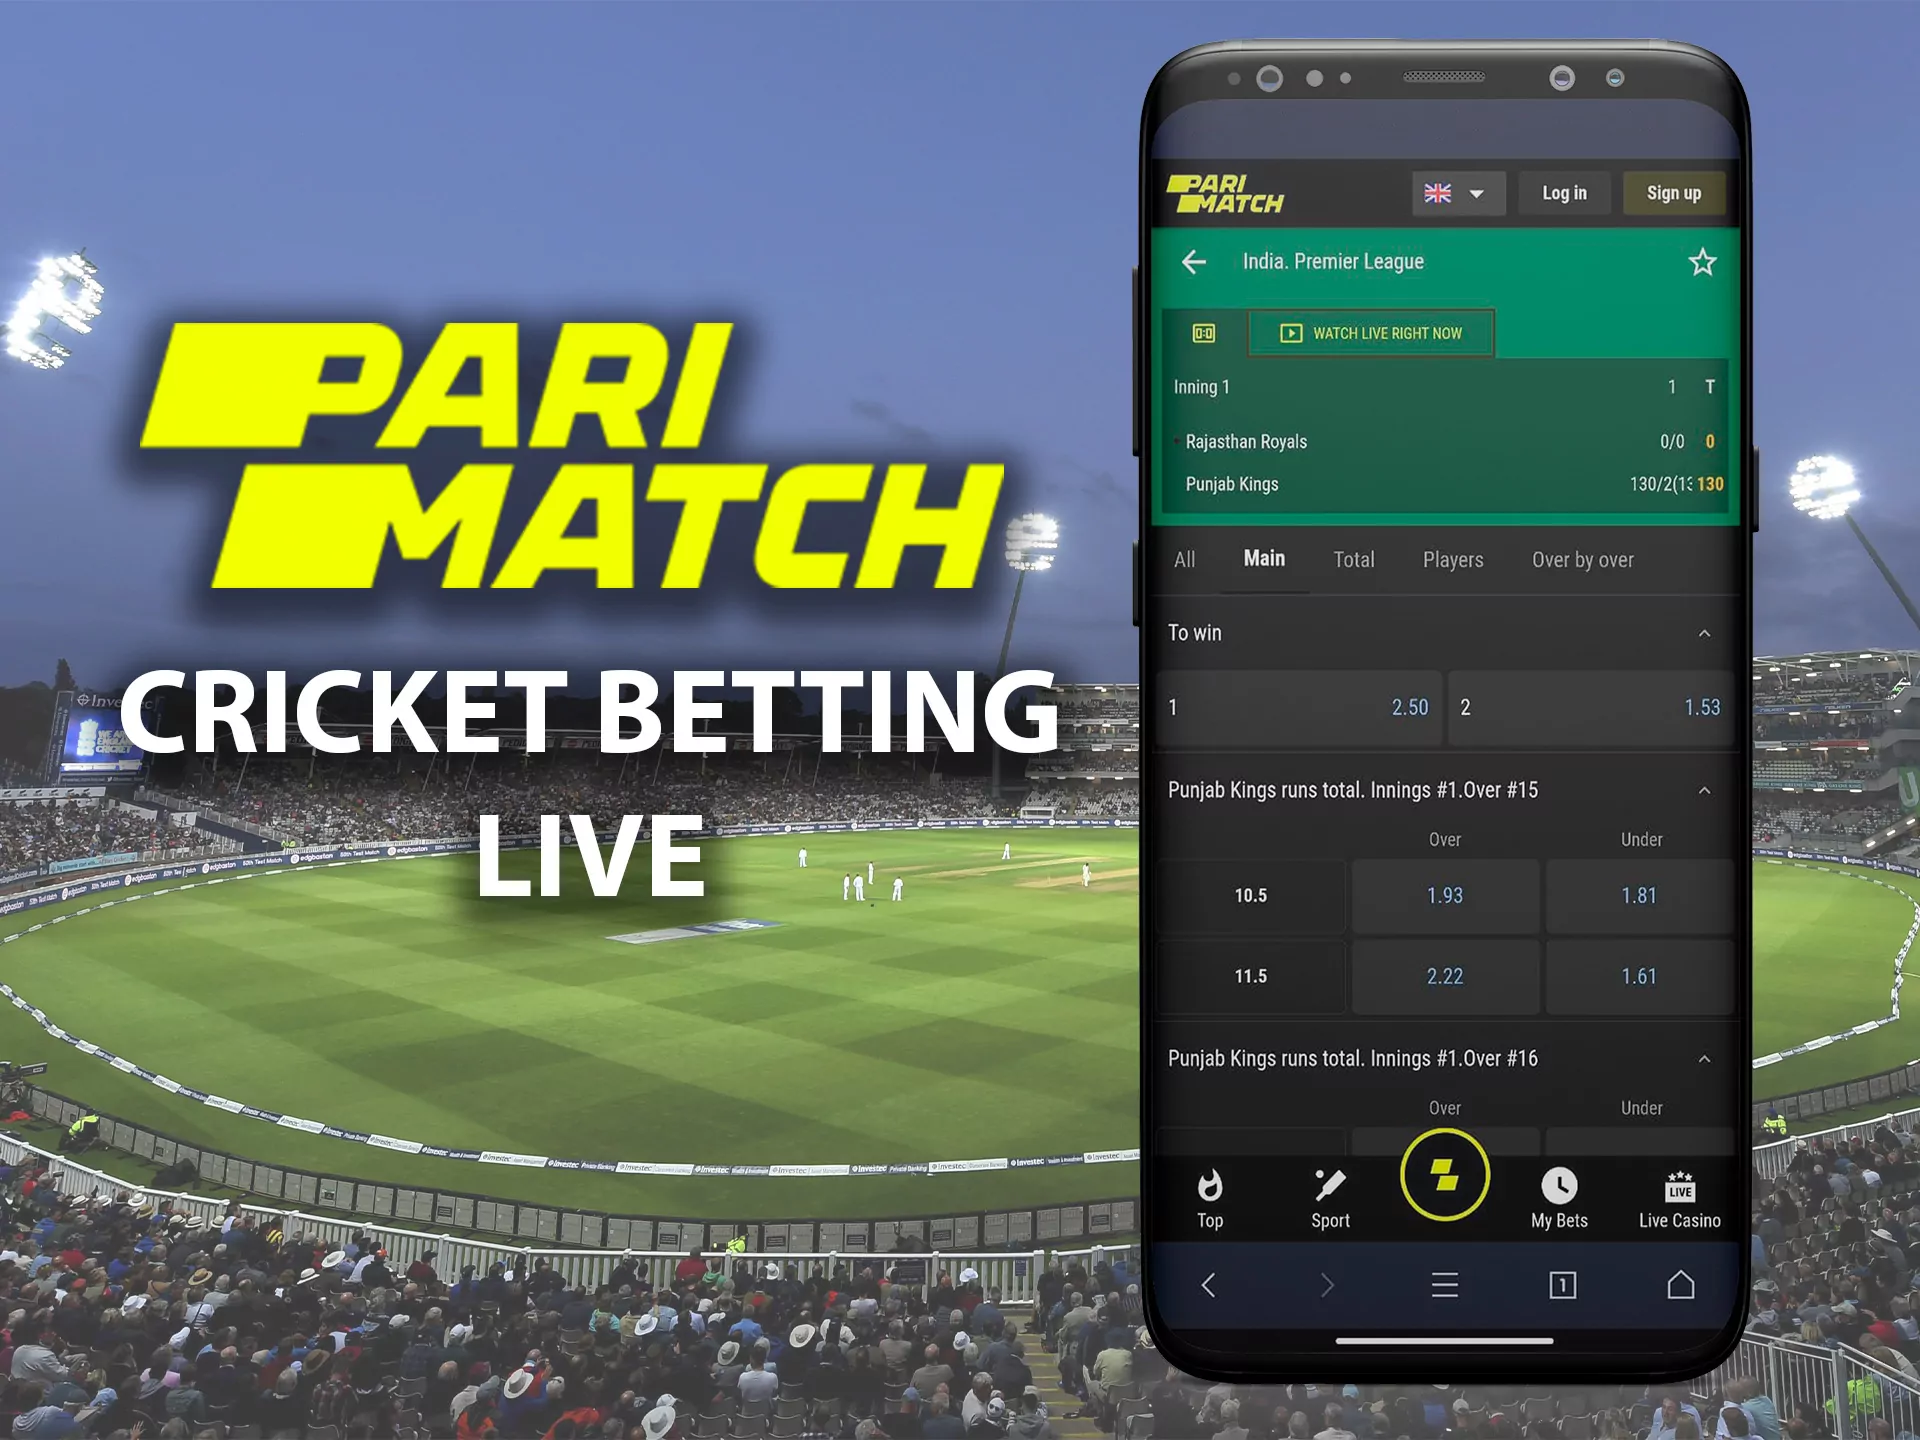 Parimatch offer make bets on cricket during the matches